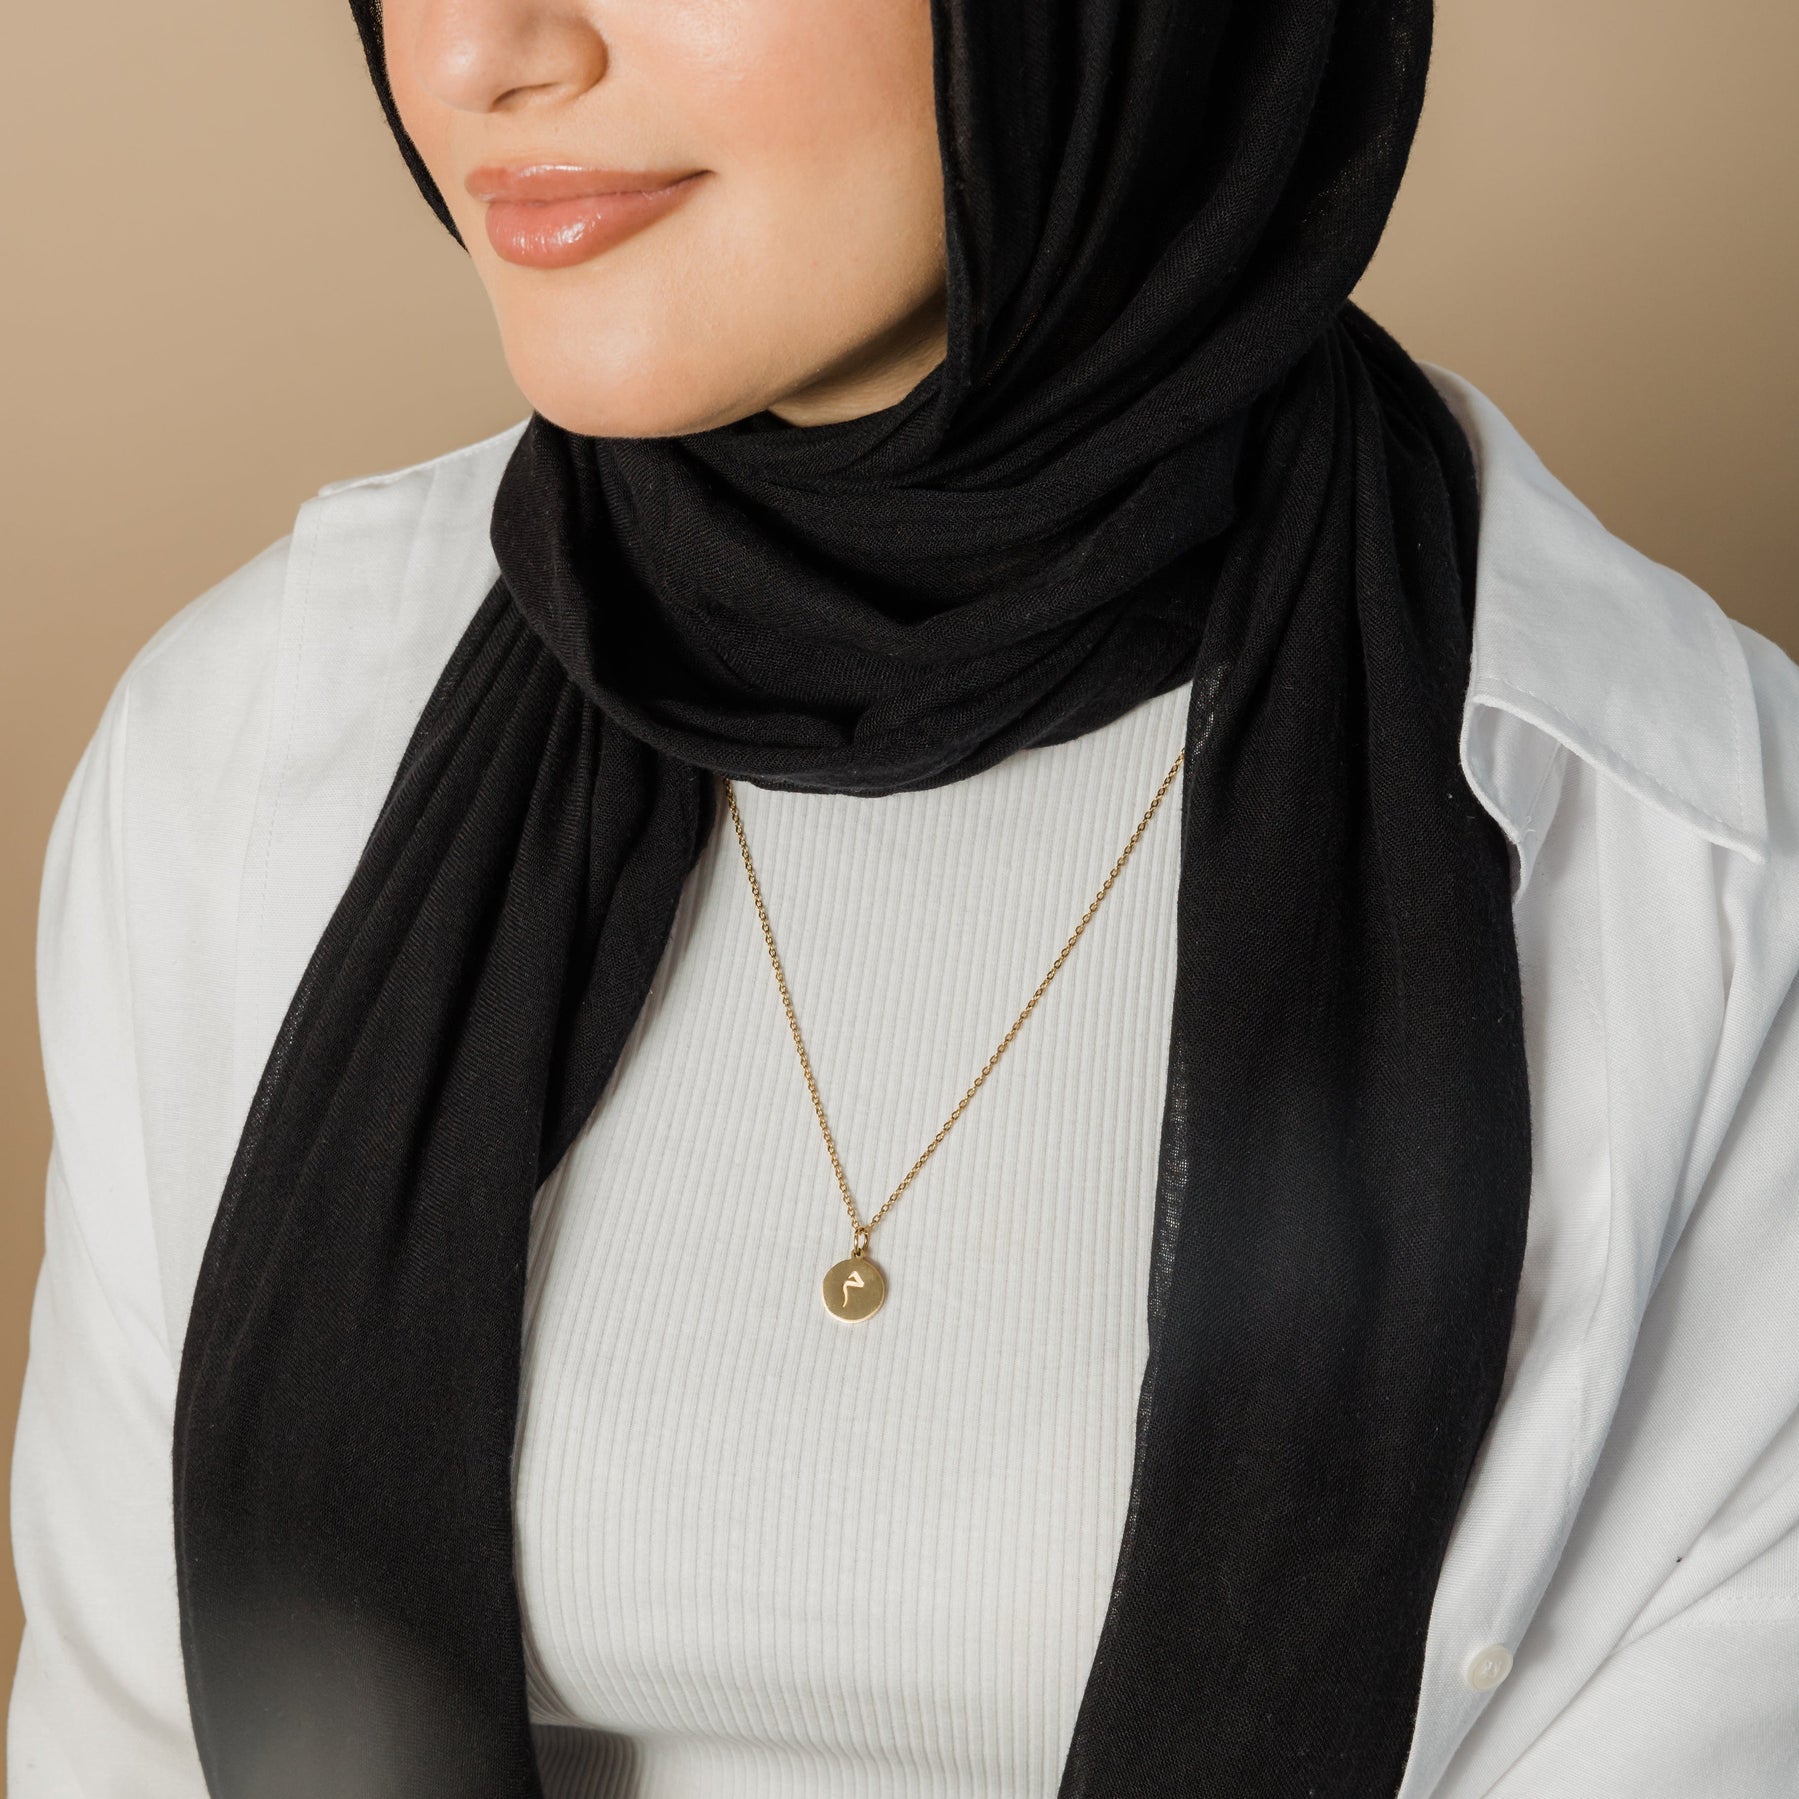 Personalised Arabic Letter Necklace - Jeluxa